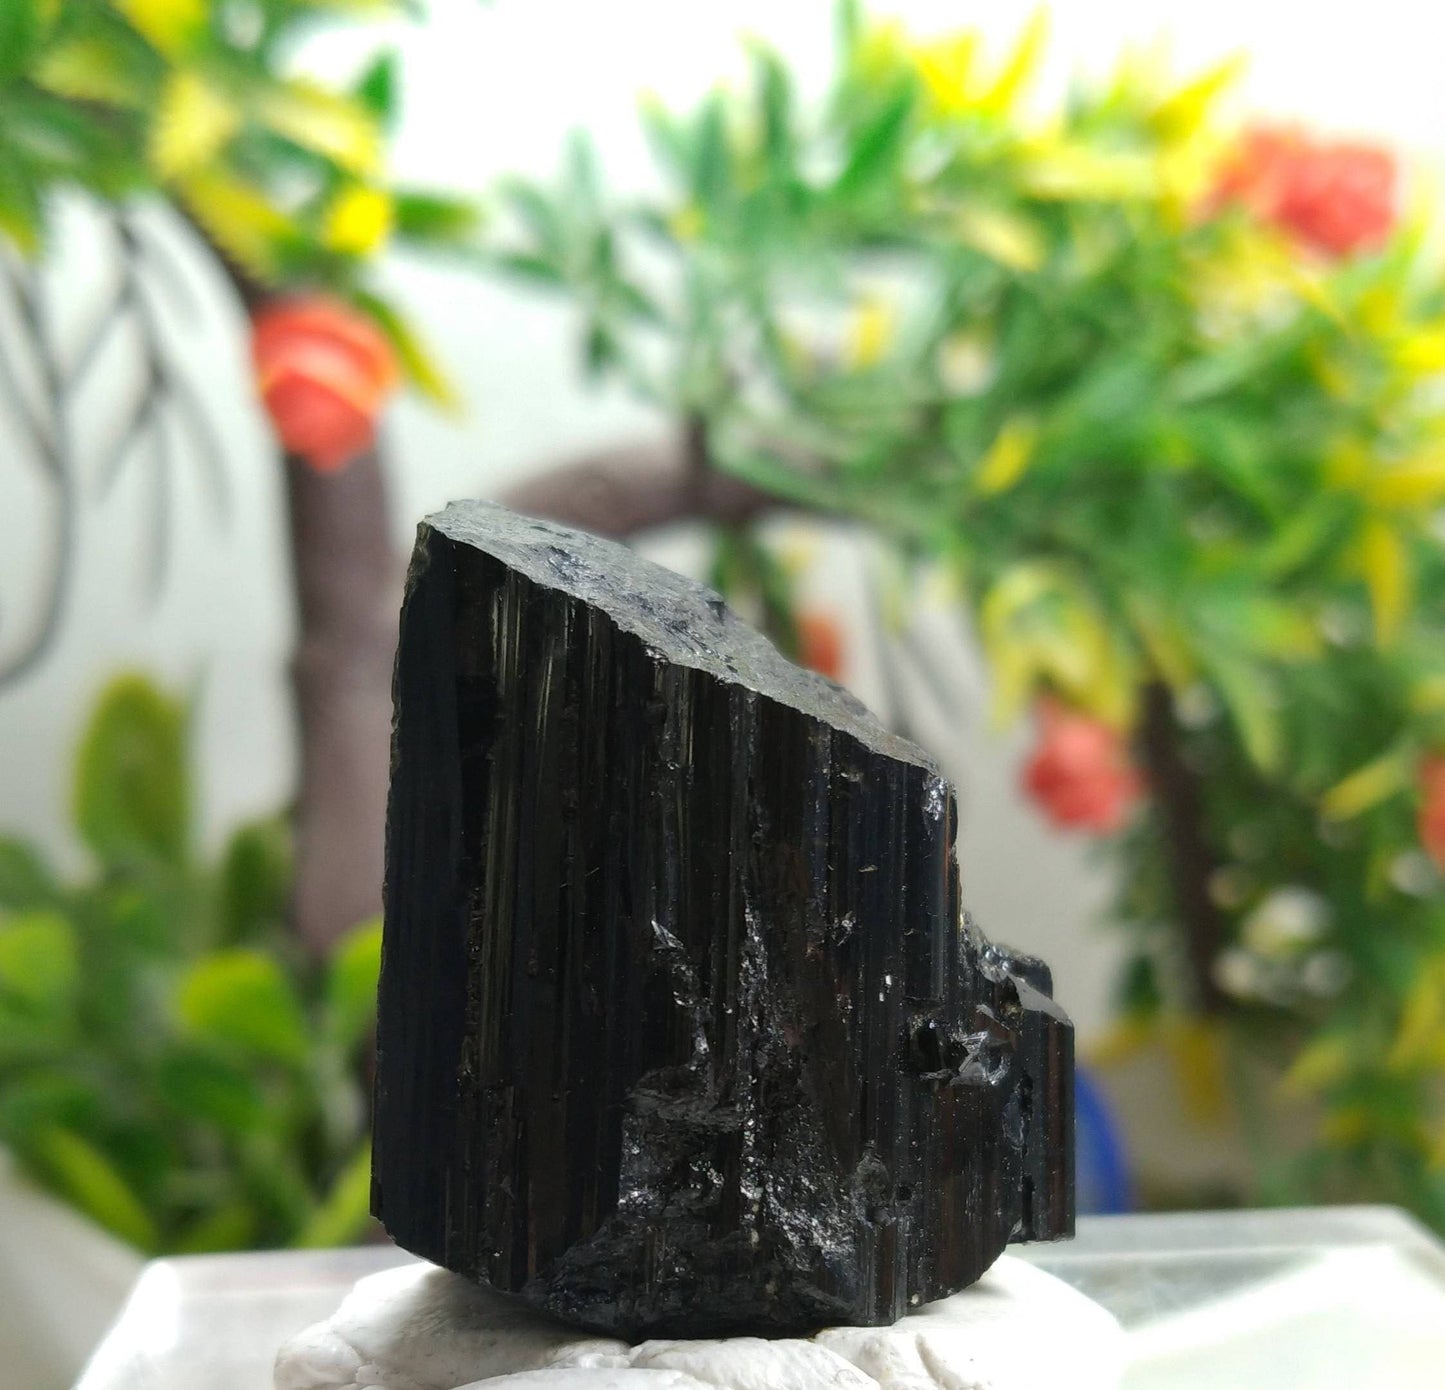 ARSAA GEMS AND MINERALSNatural Fine quality beautiful 25 grams Black Tourmaline Schorl crystal - Premium  from ARSAA GEMS AND MINERALS - Just $20.00! Shop now at ARSAA GEMS AND MINERALS